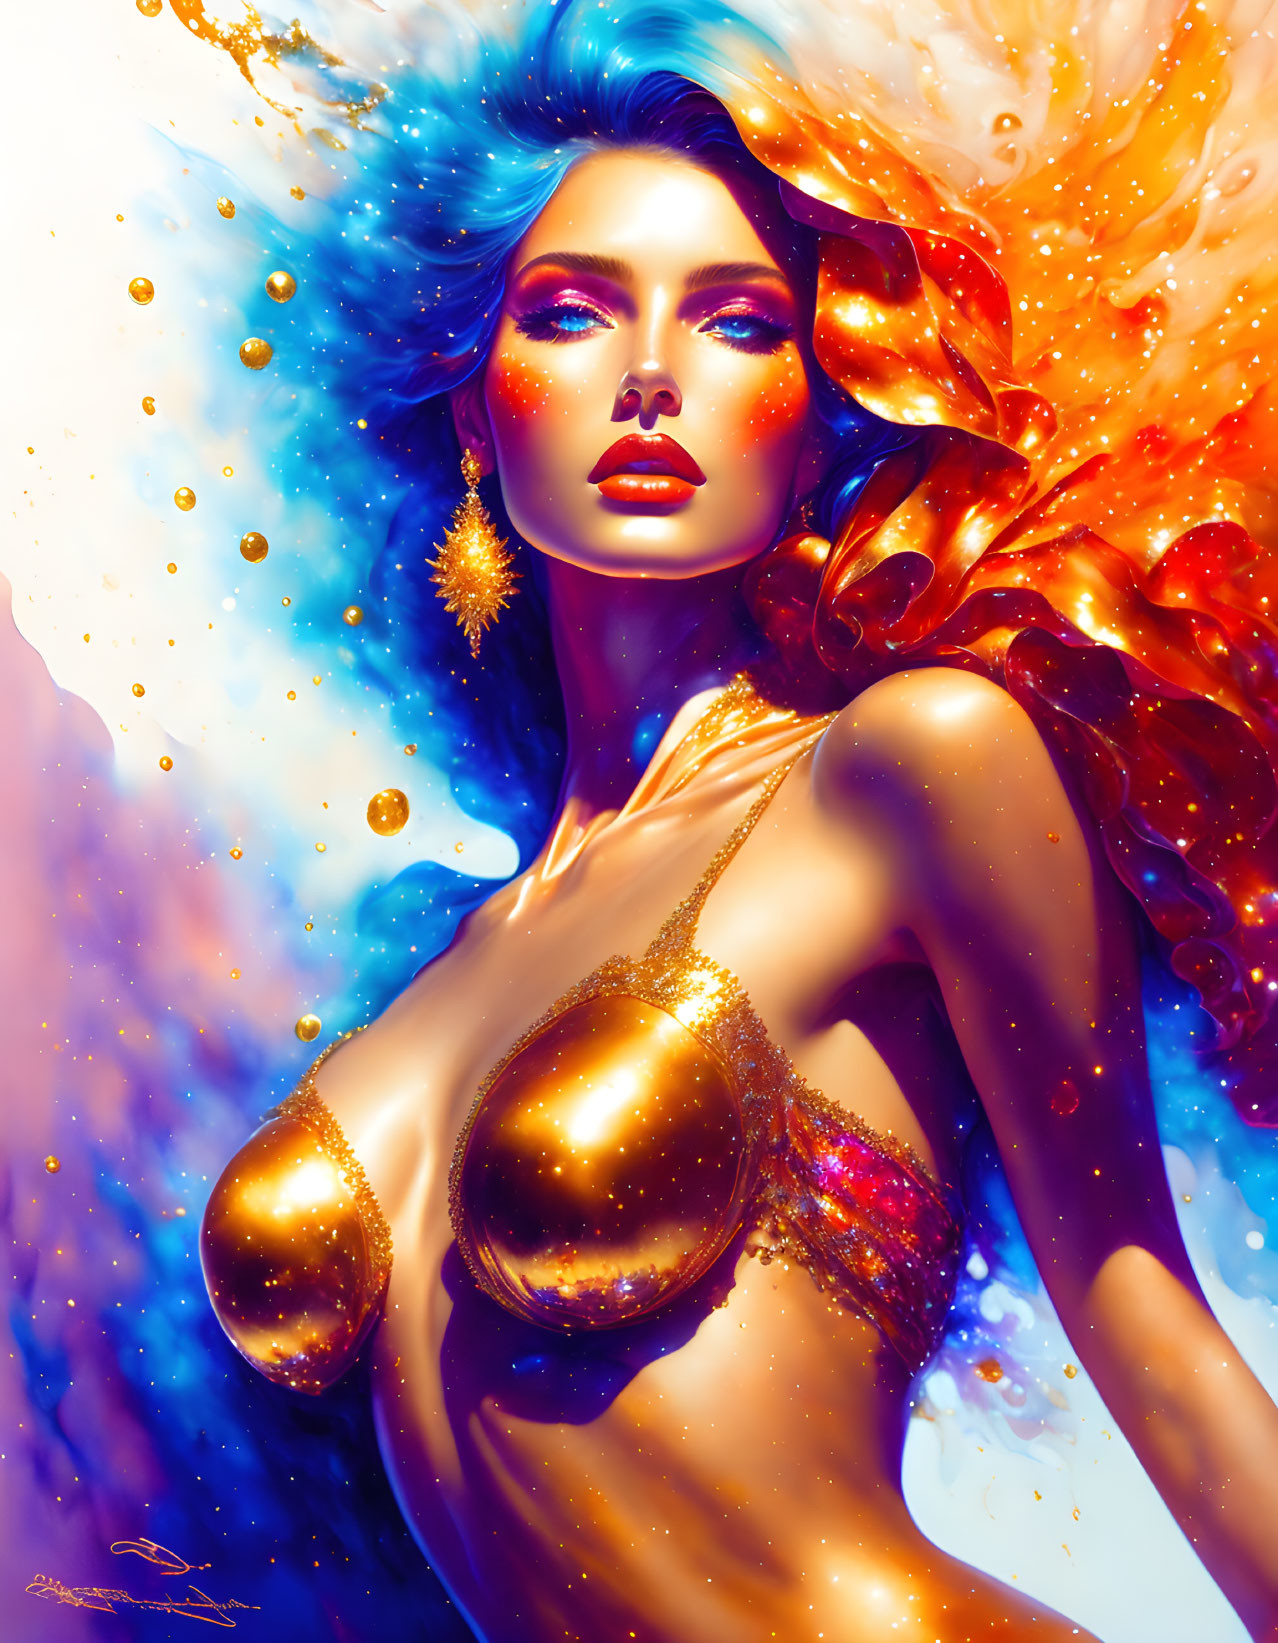 Colorful artwork featuring woman with blue and orange hair and glitter makeup